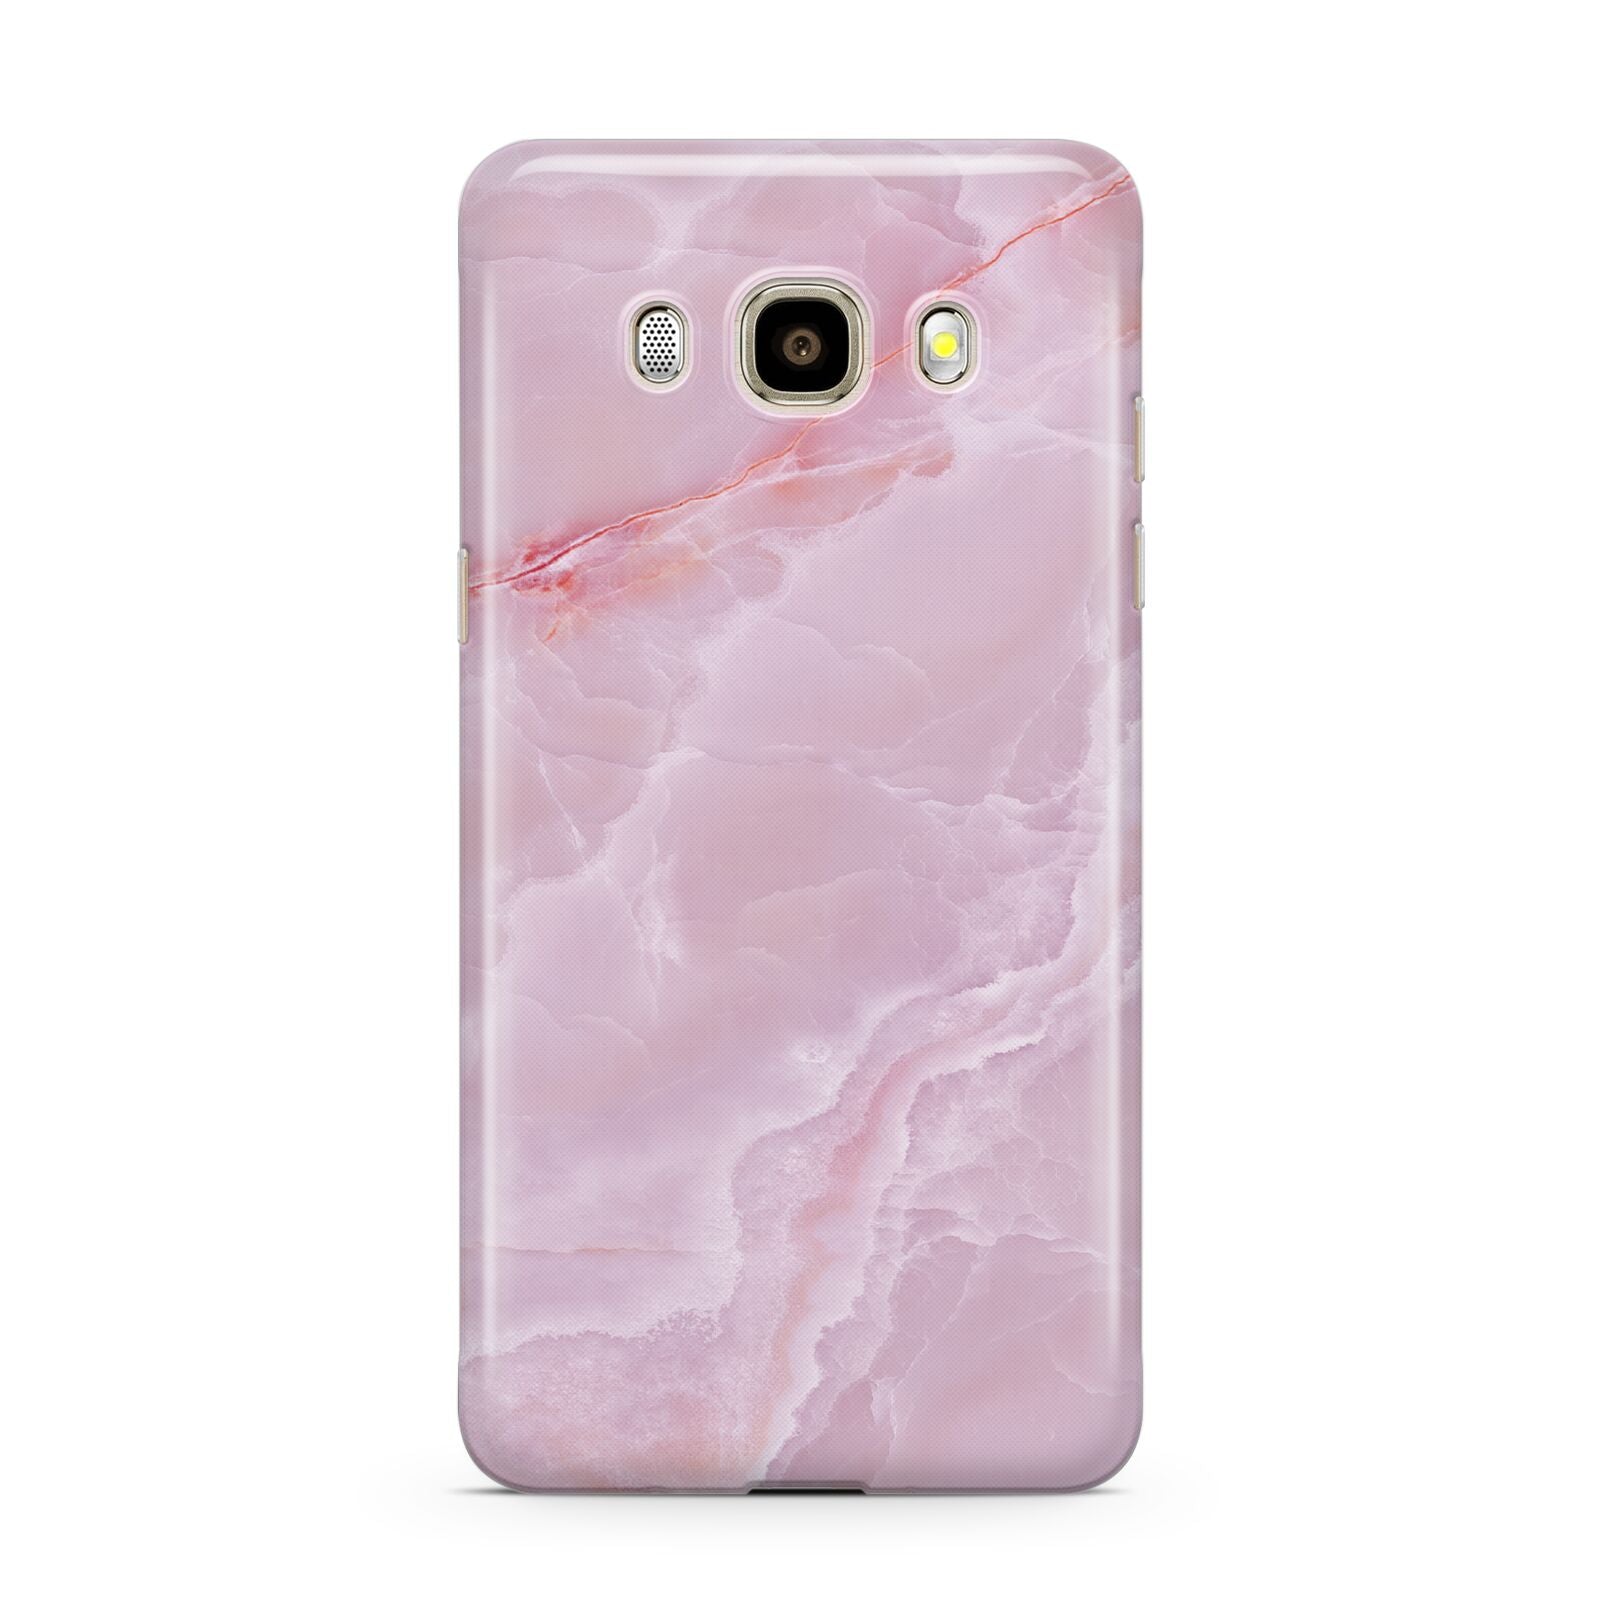 Dreamy Pink Marble Samsung Galaxy J7 2016 Case on gold phone